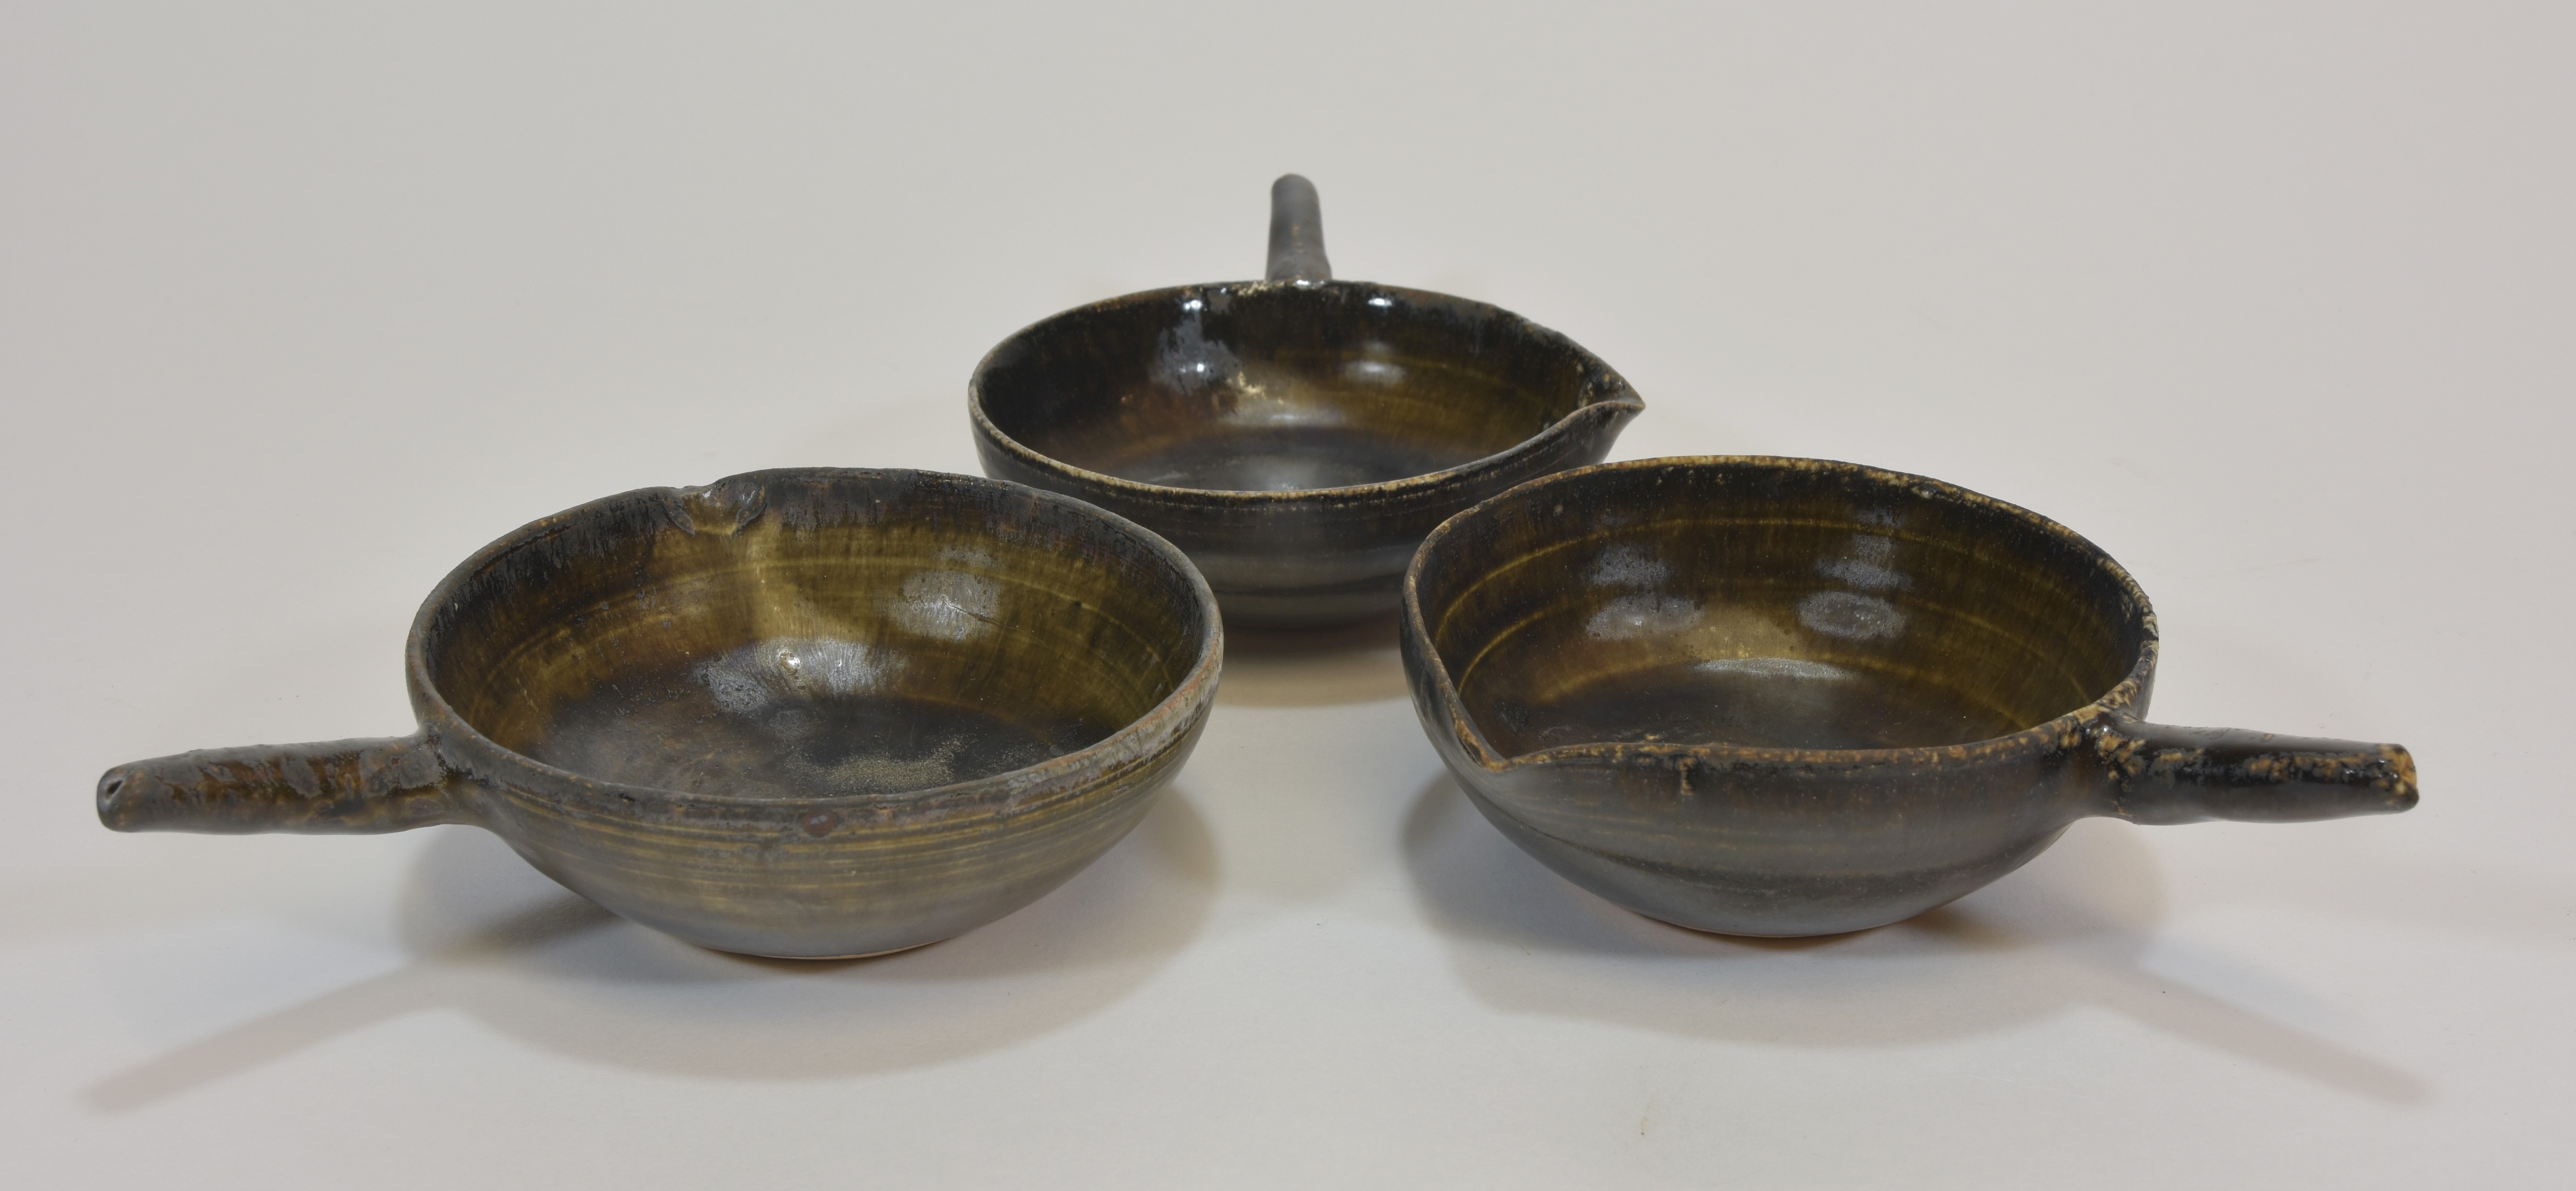 Three 12th century Southern Song dynasty brown glazed bowls with handles 10cm diameter (3)宋朝時期 灰釉小碗